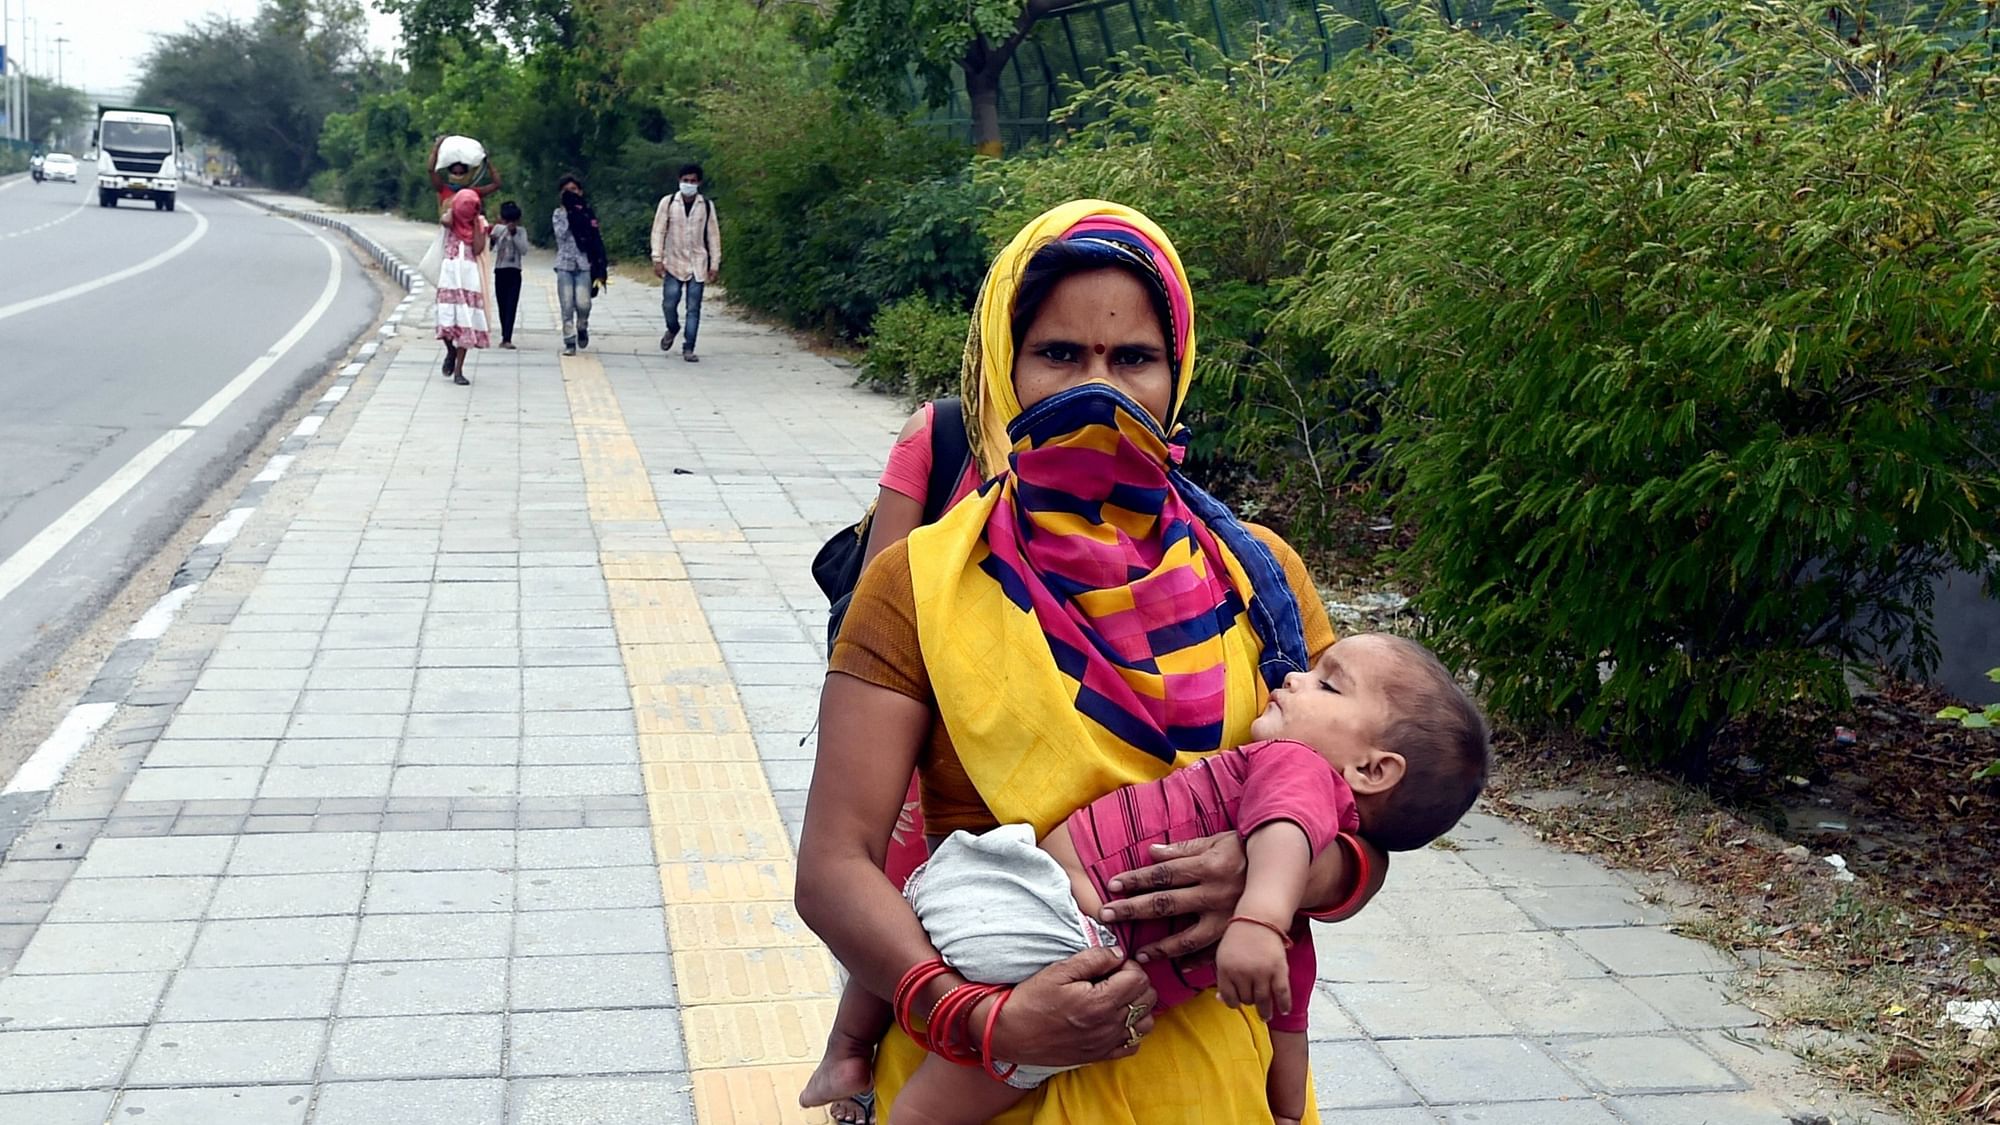 A migrant woman with her infant child travelling from Haryana walks towards her native place, during the ongoing COVID-19 nationwide lockdown, at Vivek Vihar in New Delhi, Wednesday, May 13, 2020.